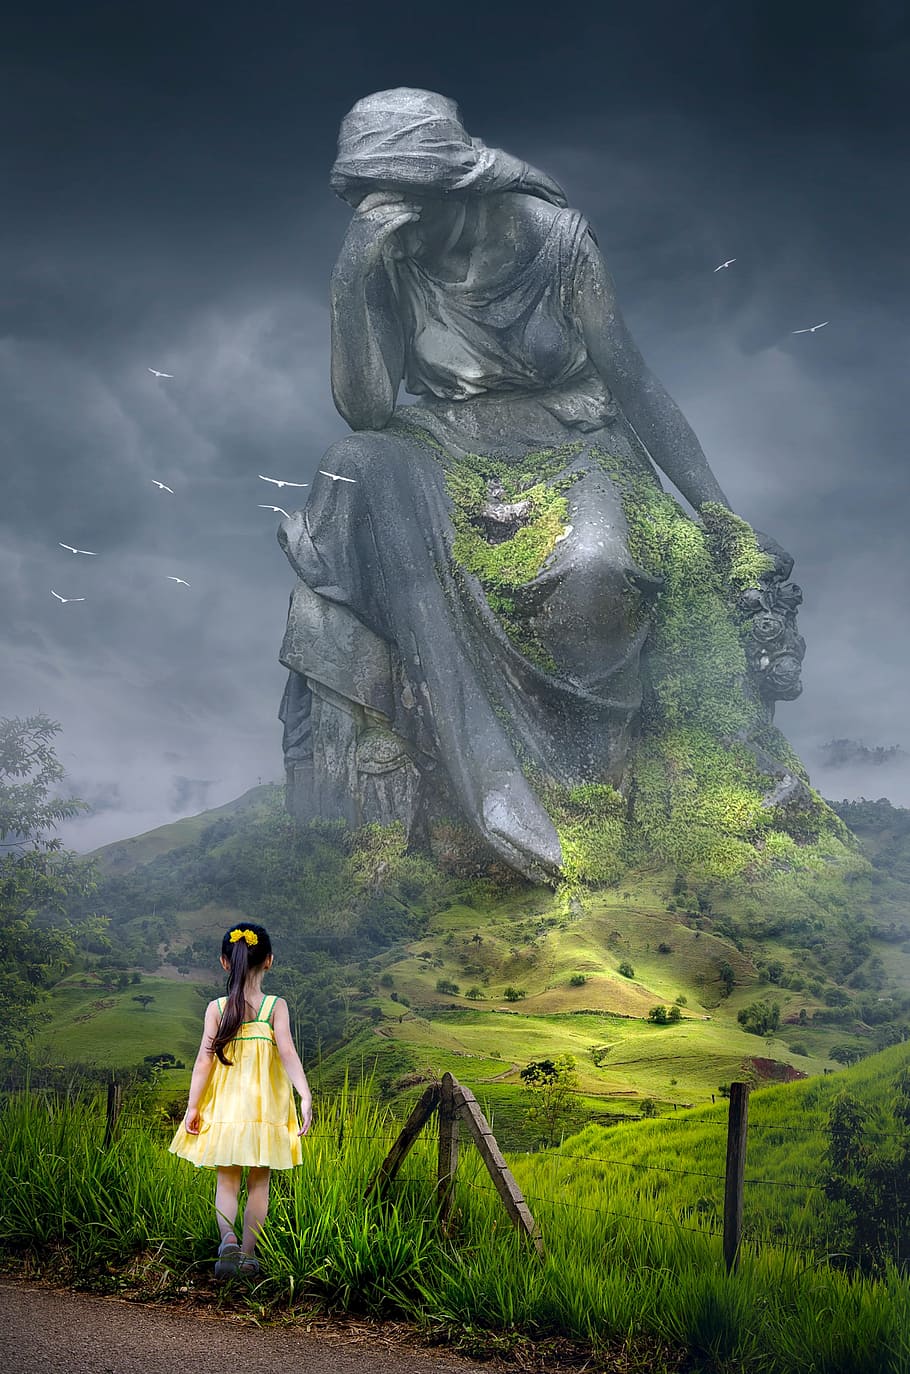 girl in yellow sundress in front of a giant woamn statue, fantasy